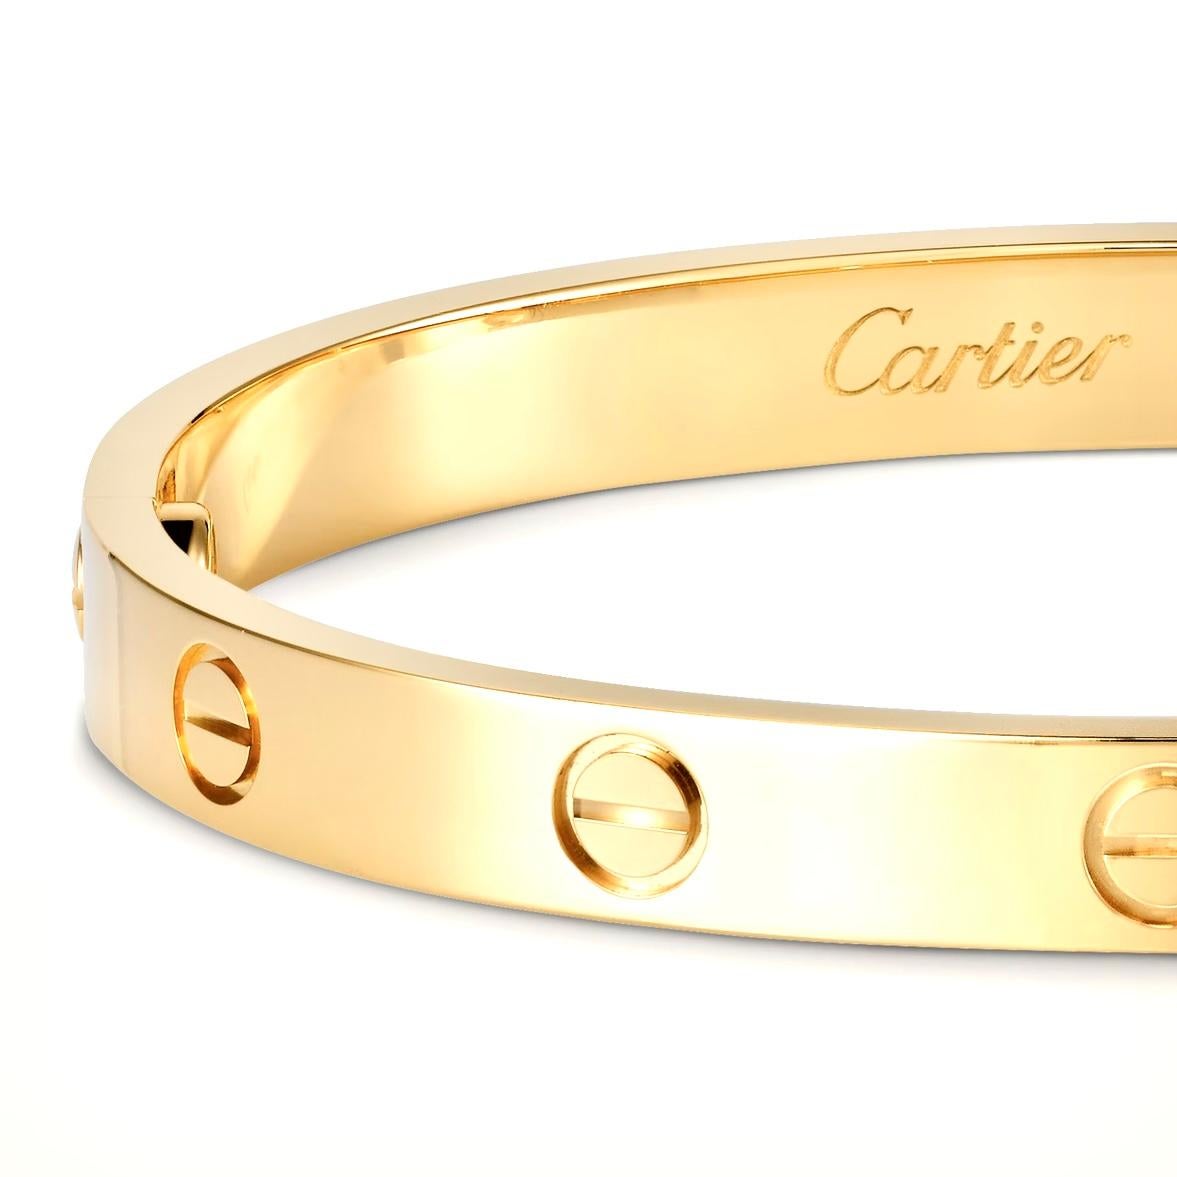 Designer: Cartier
Collection: Love
Style: Bangle
Metal: Yellow Gold 
Metal Purity: 18K 
Screw Style System: New Screw System 
Bracelet Size: 21 = 21 cm
Hallmarks: Cartier; Serial #, 750
Includes: 24 Months Brilliance Jewels Warranty
Cartier Box &